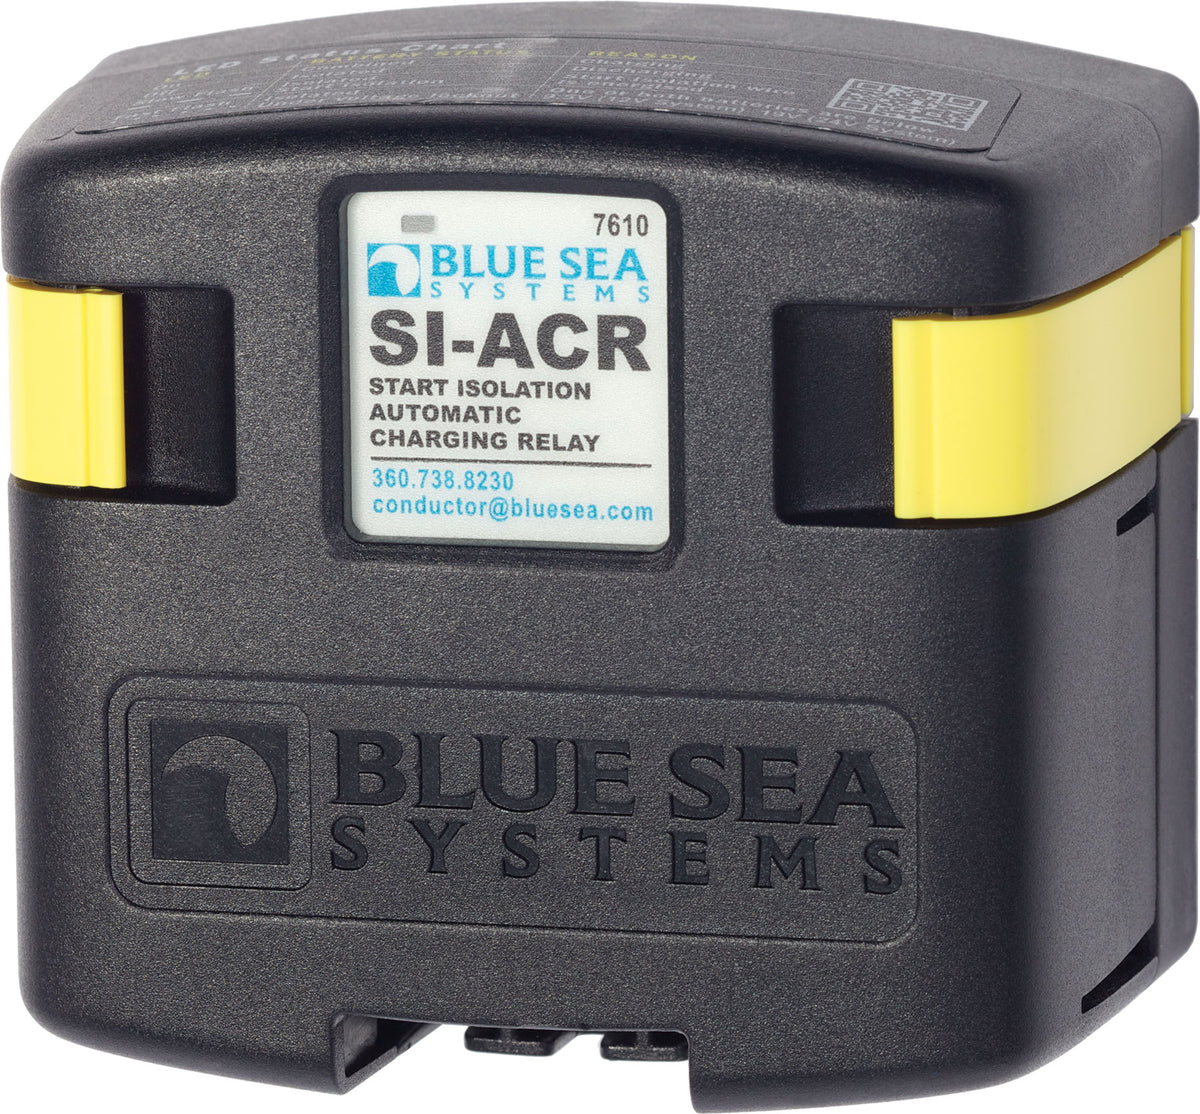 Blue Sea Systems SI-ACR Automatic Charging Relay - 12/24V DC 120A 7610